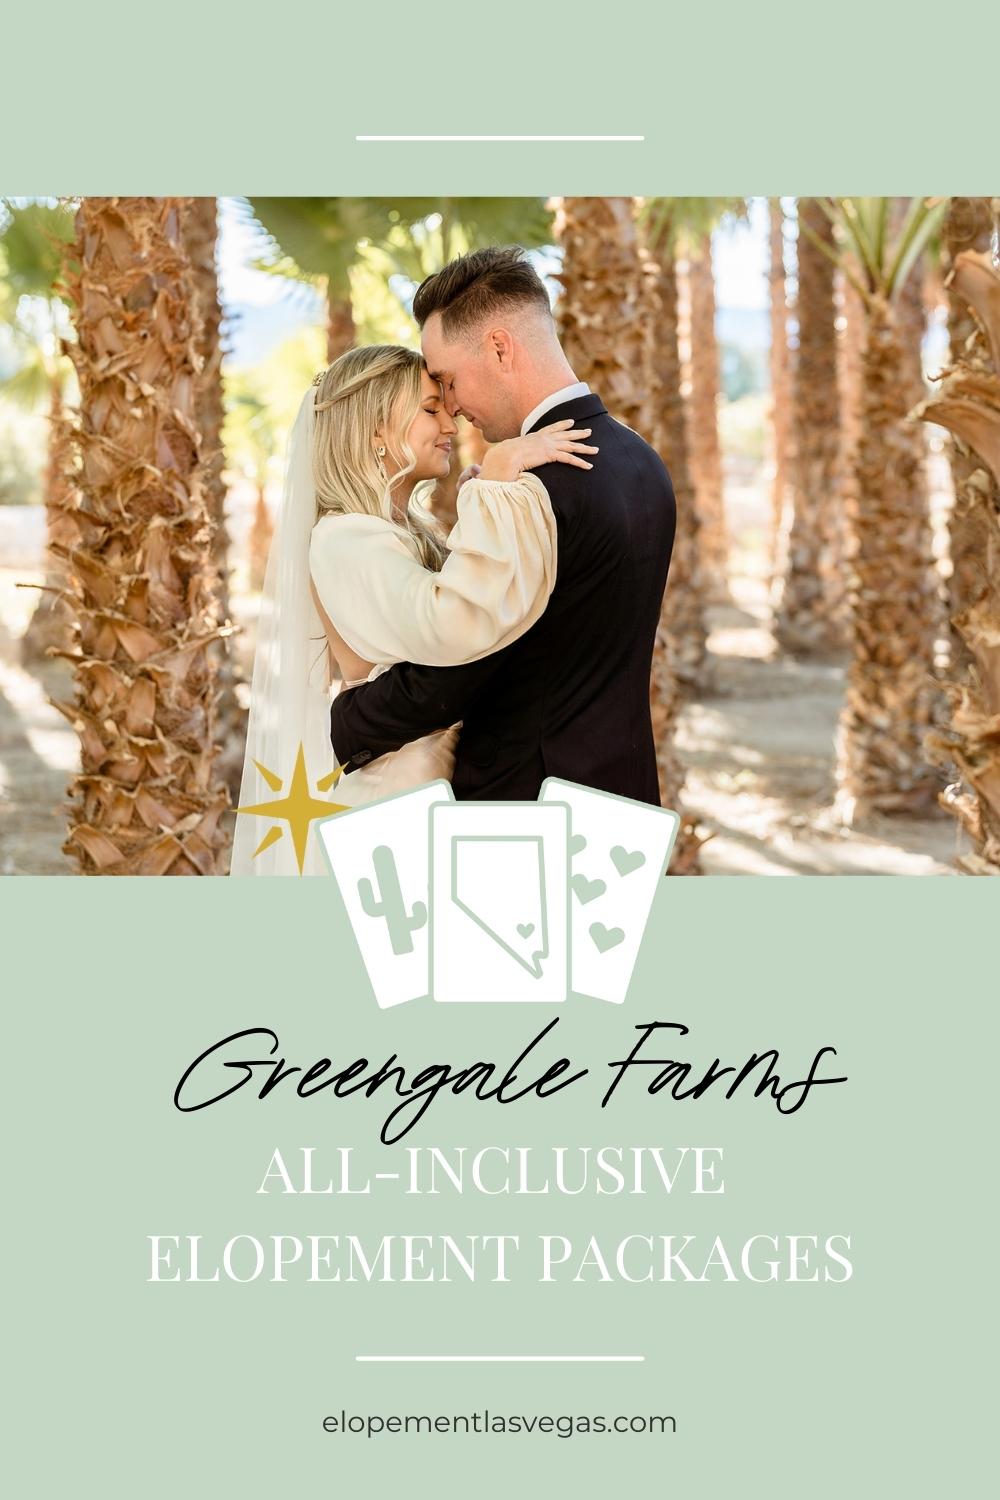 Newlywed couple sharing an embrace during their elopement shoot; image overlaid with text that reads GreenGale Farms All-Inclusive Elopement Packages